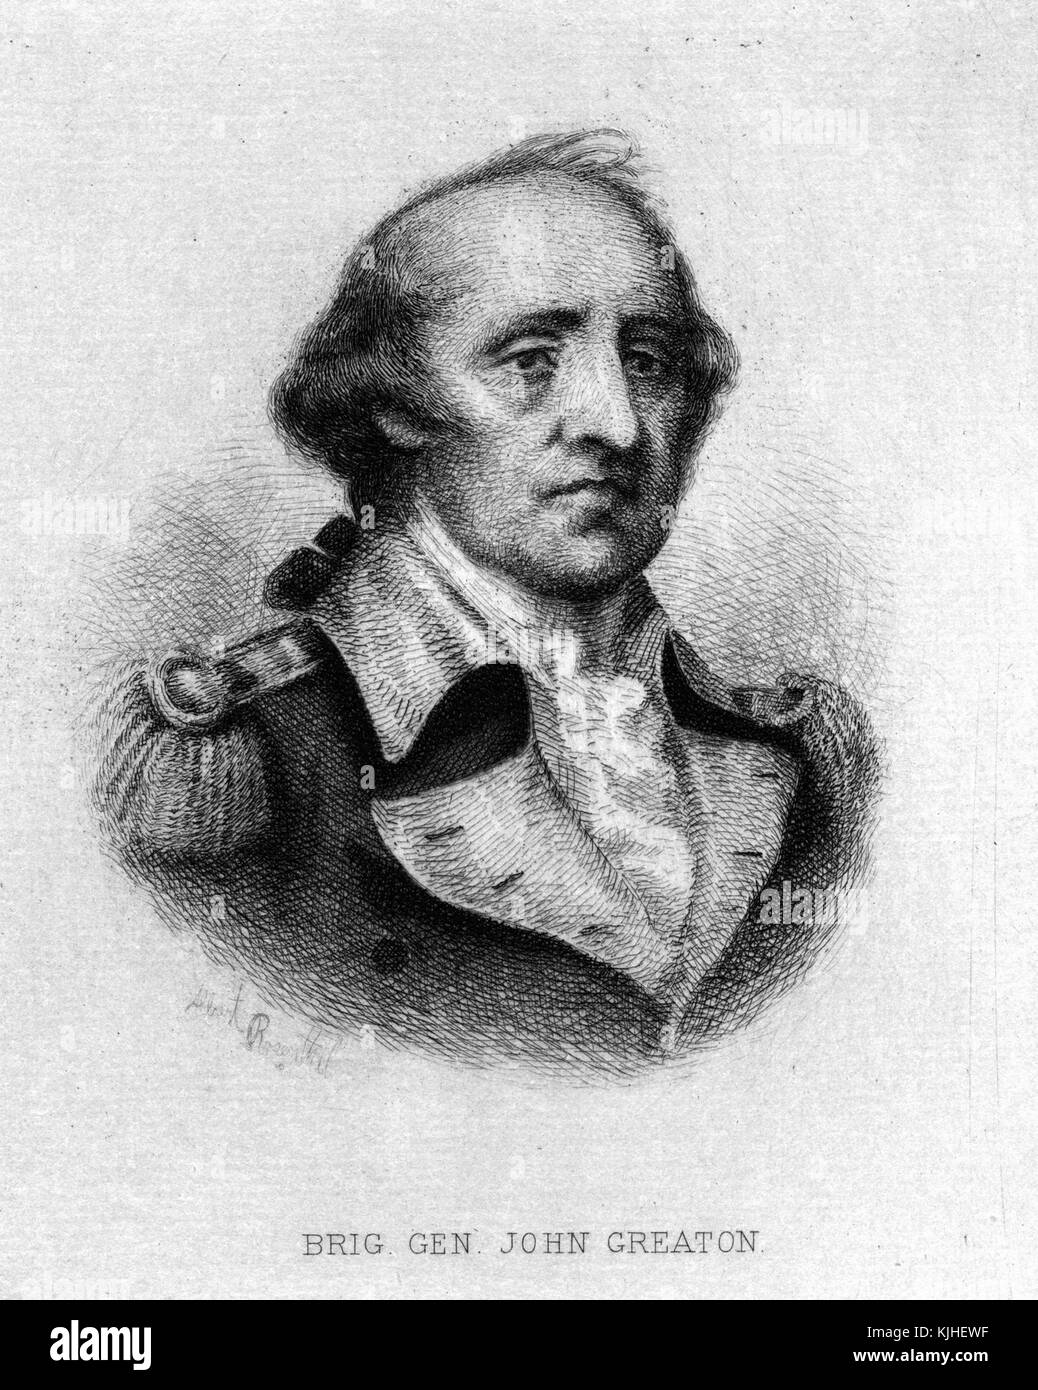 An engraving from a portrait of John Greaton, he served as an officer during the American Revolutionary War, he was ranked as a colonel when he commanded the 3rd Massachusetts Regiment during several battles including the Battle of Bunker Hill and the Battle of Saratoga, he eventually was promoted to the rank of brigadier general which he held until most of the Continental Army was disbanded in 1783, Massachusetts, 1800. From the New York Public Library. Stock Photo